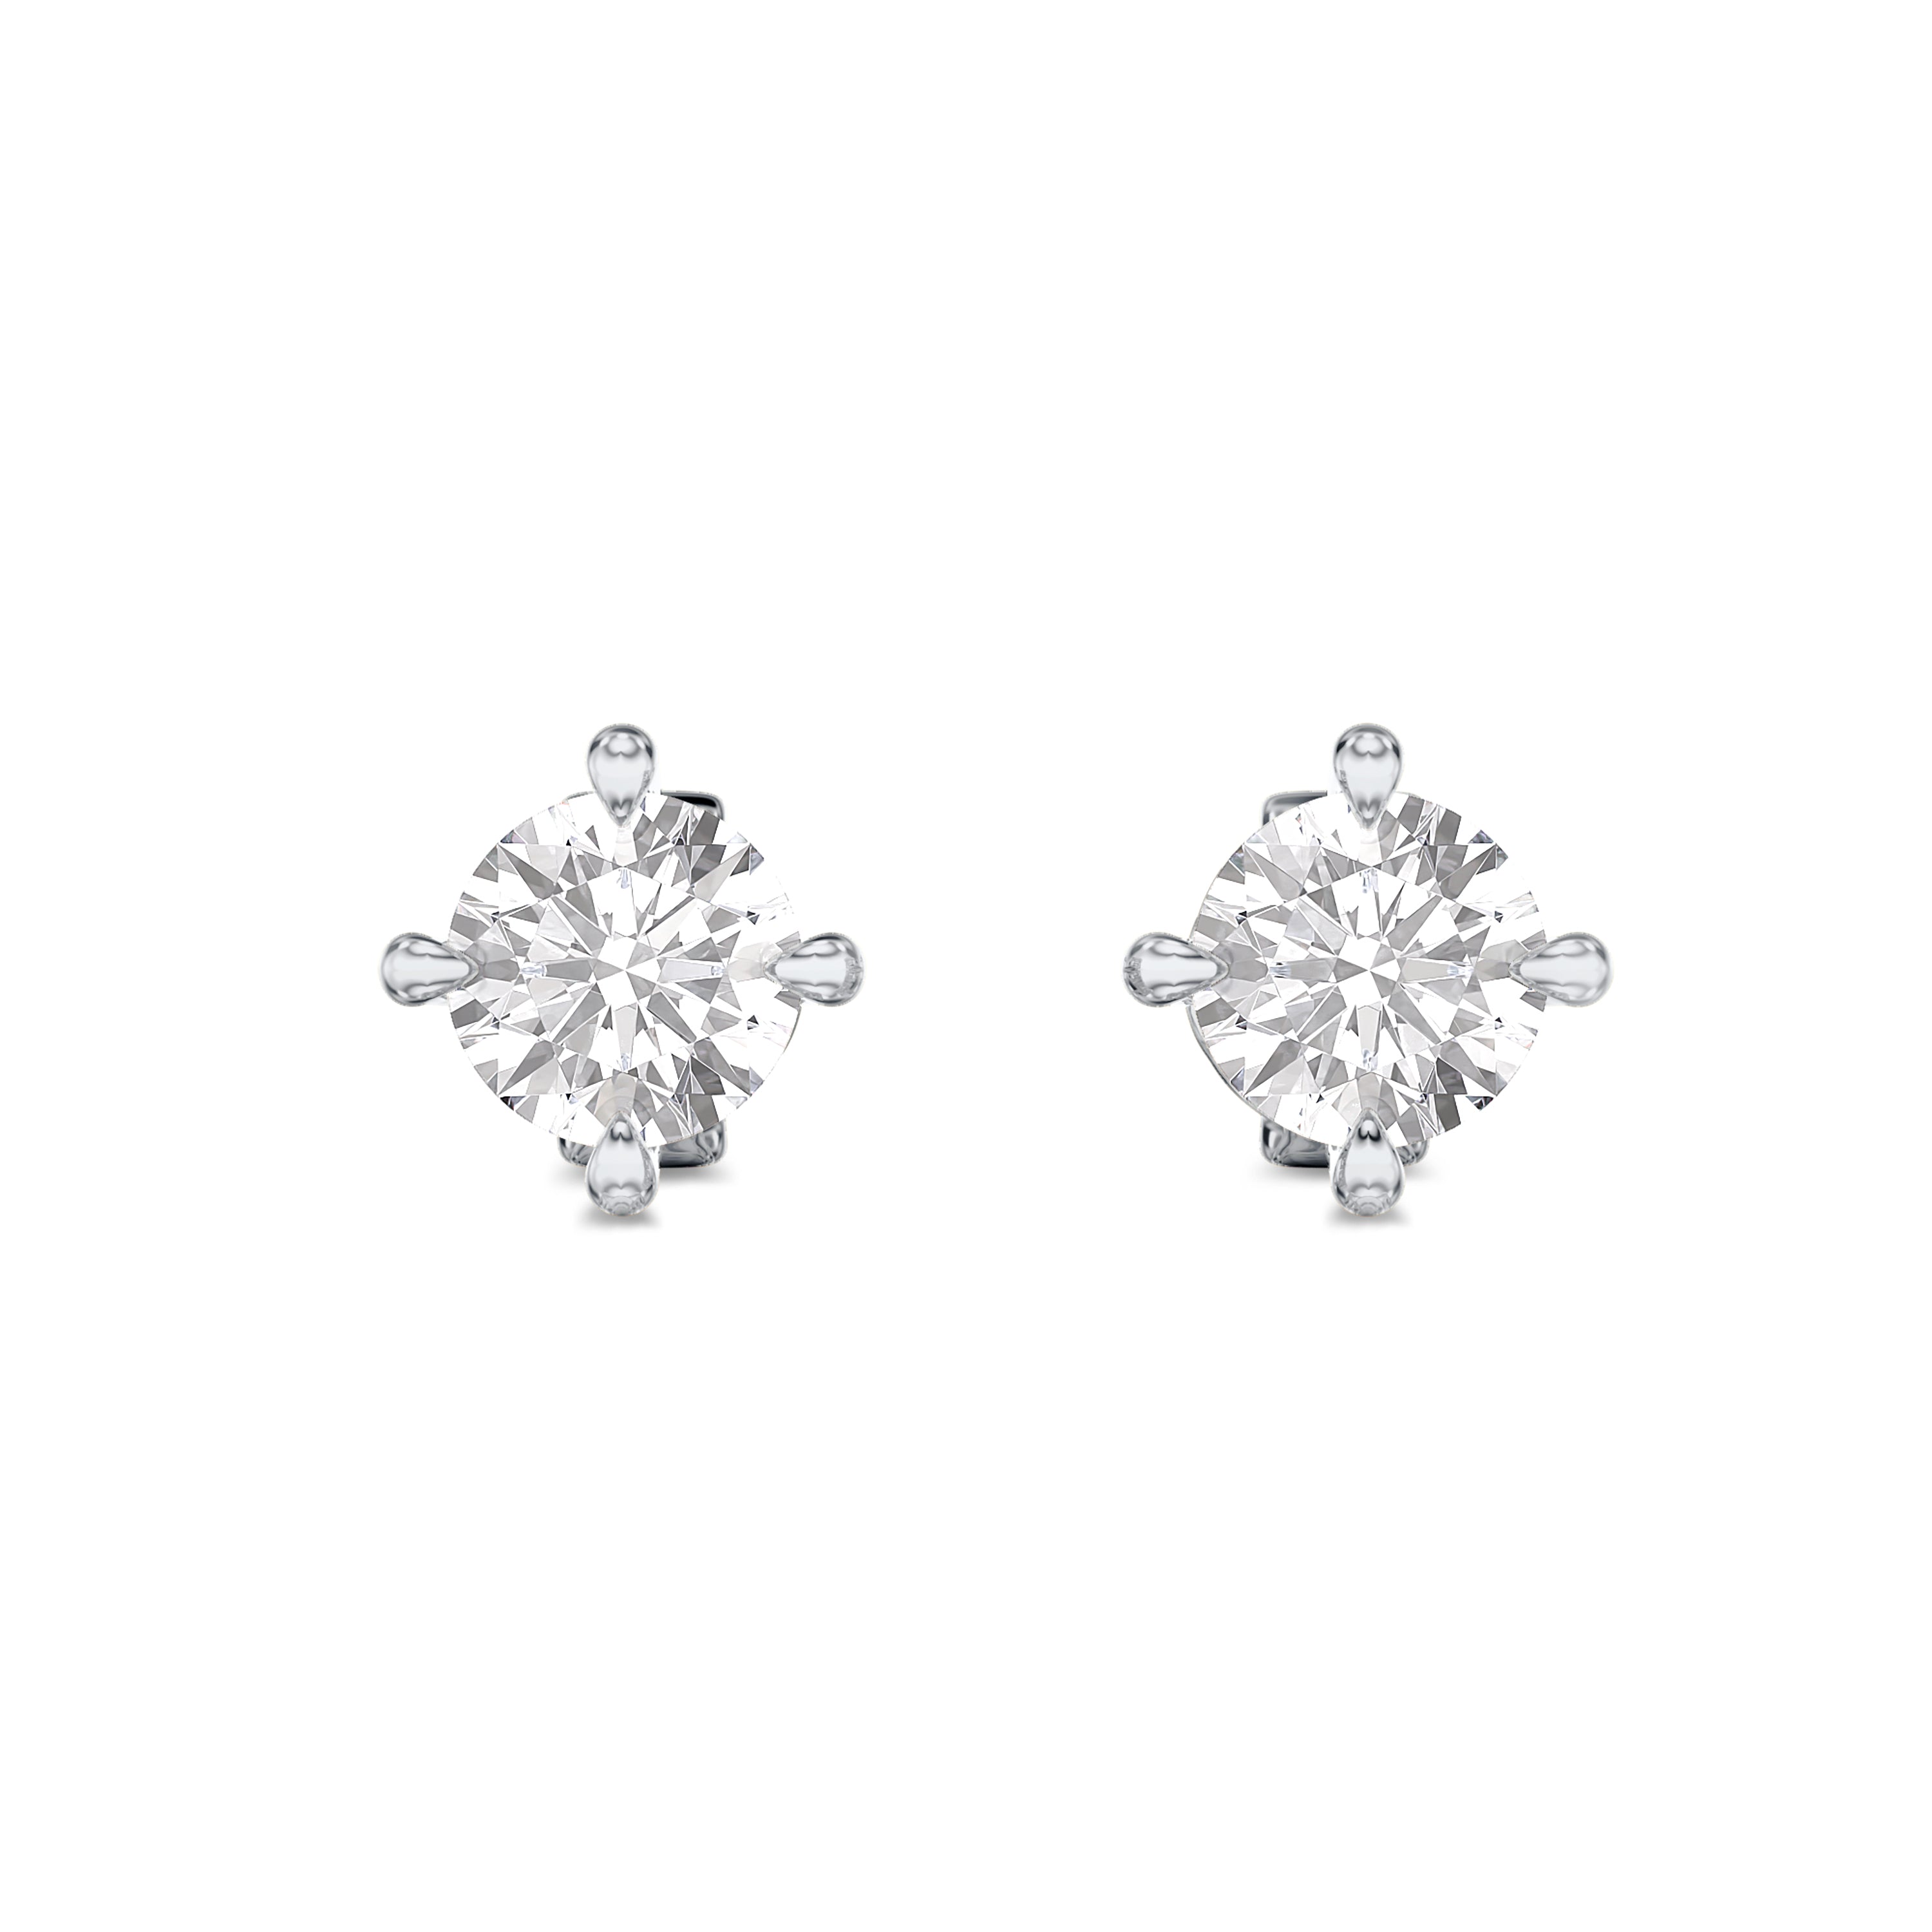 0.40 carat solitaire diamond earrings in 18K white gold, GH color and SI clarity